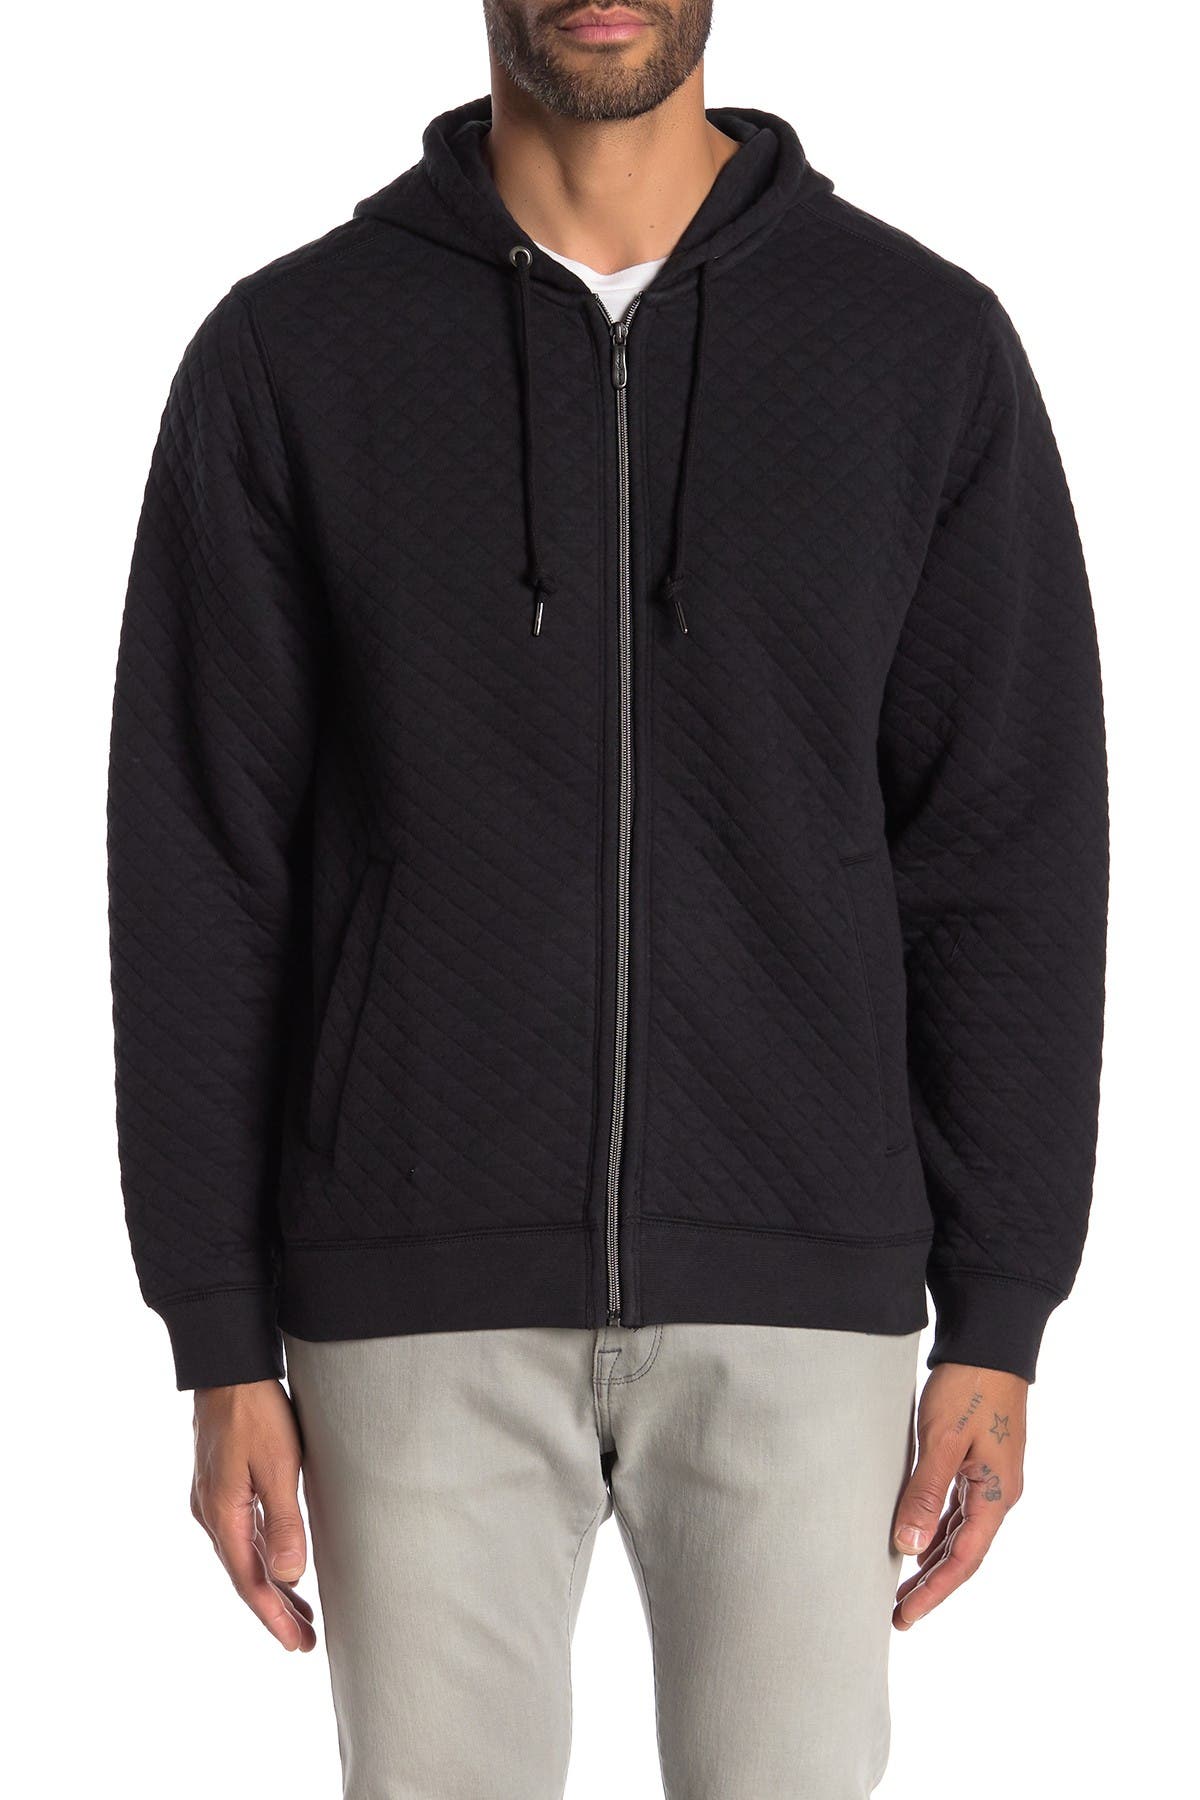 tommy bahama quilt trip zip jacket